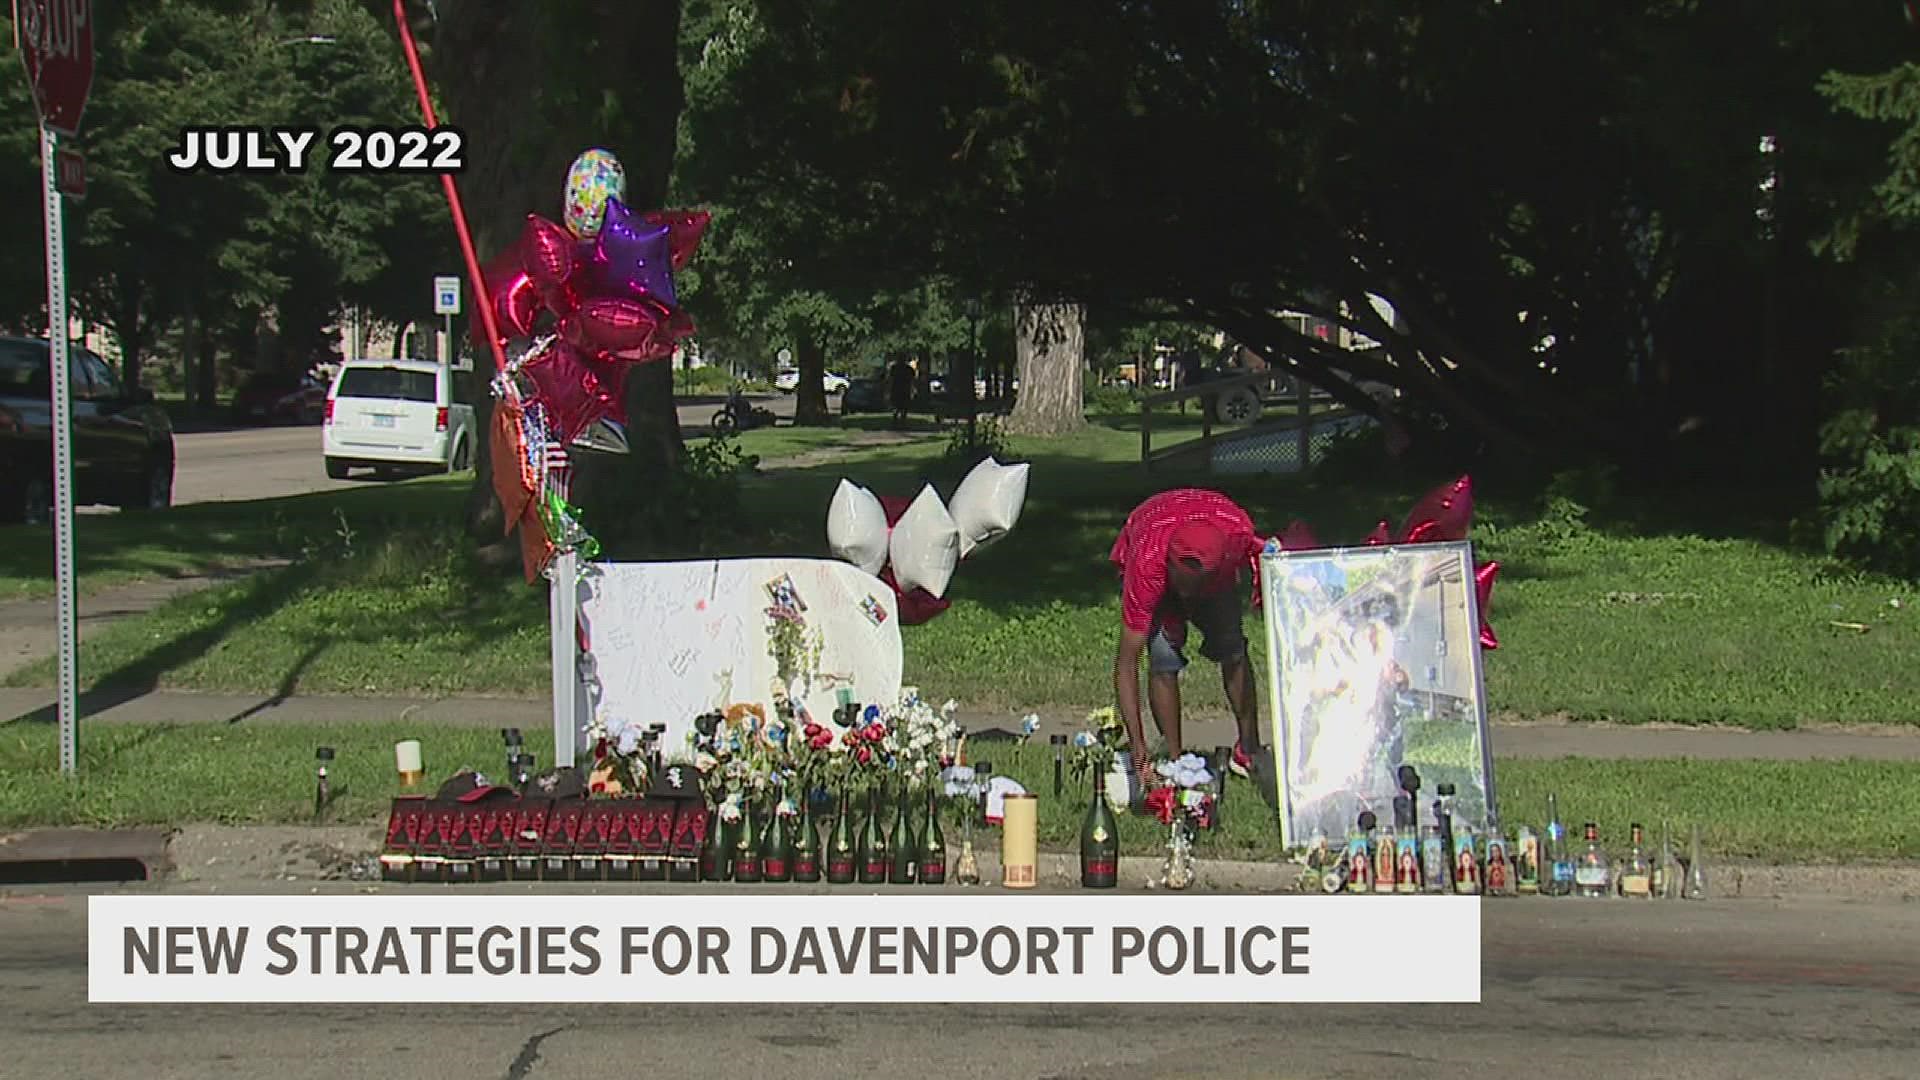 The City of Davenport doubled down on the issue after a rise in shootings in recent years and the deaths of two young children in 2021.